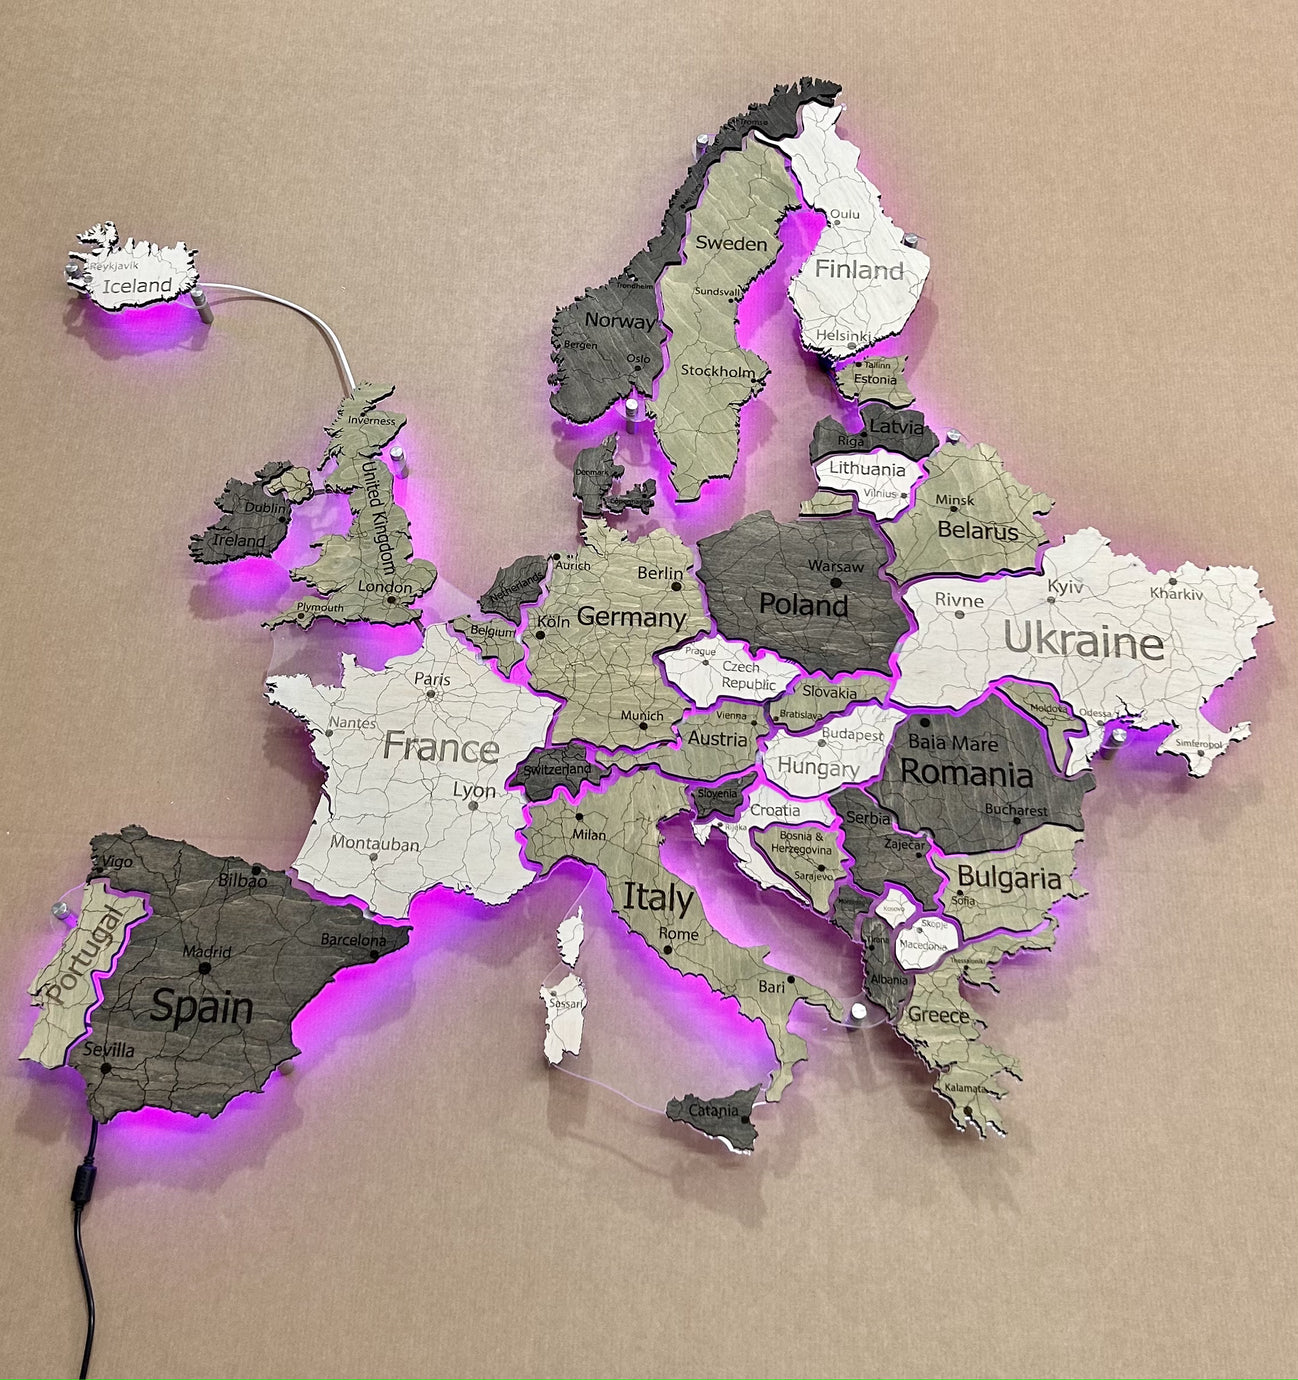 Europe LED RGB map on acrylic glass with backlighting between countries color Verde